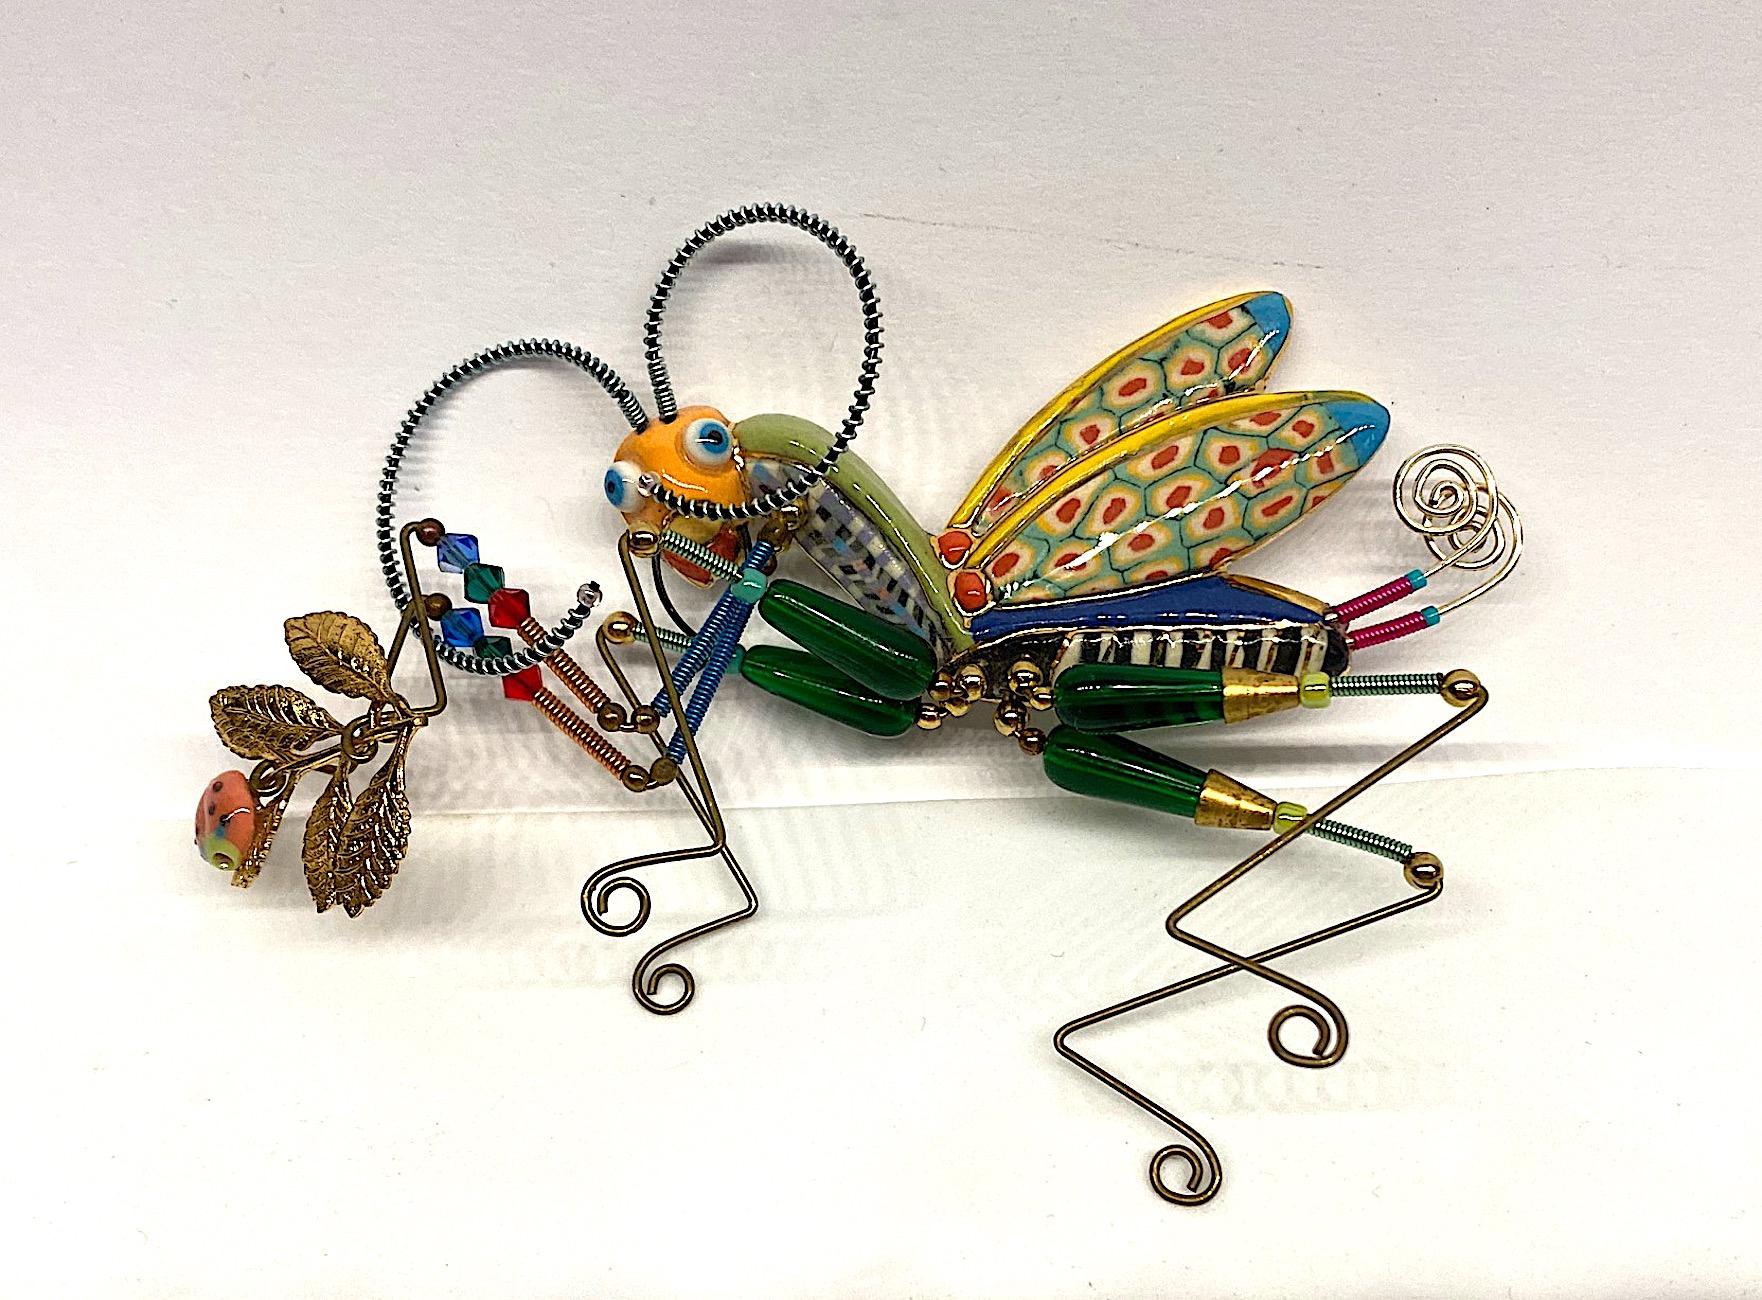 Always with a sense of whimsy, Jewelry 10 pieces designed by Cynthia Chuang and her husband Erh-Ping Tsai are highly collected and displayed. This is a large one of a kind praying mantis brooch holding a branch with lady bug from the company Jewelry